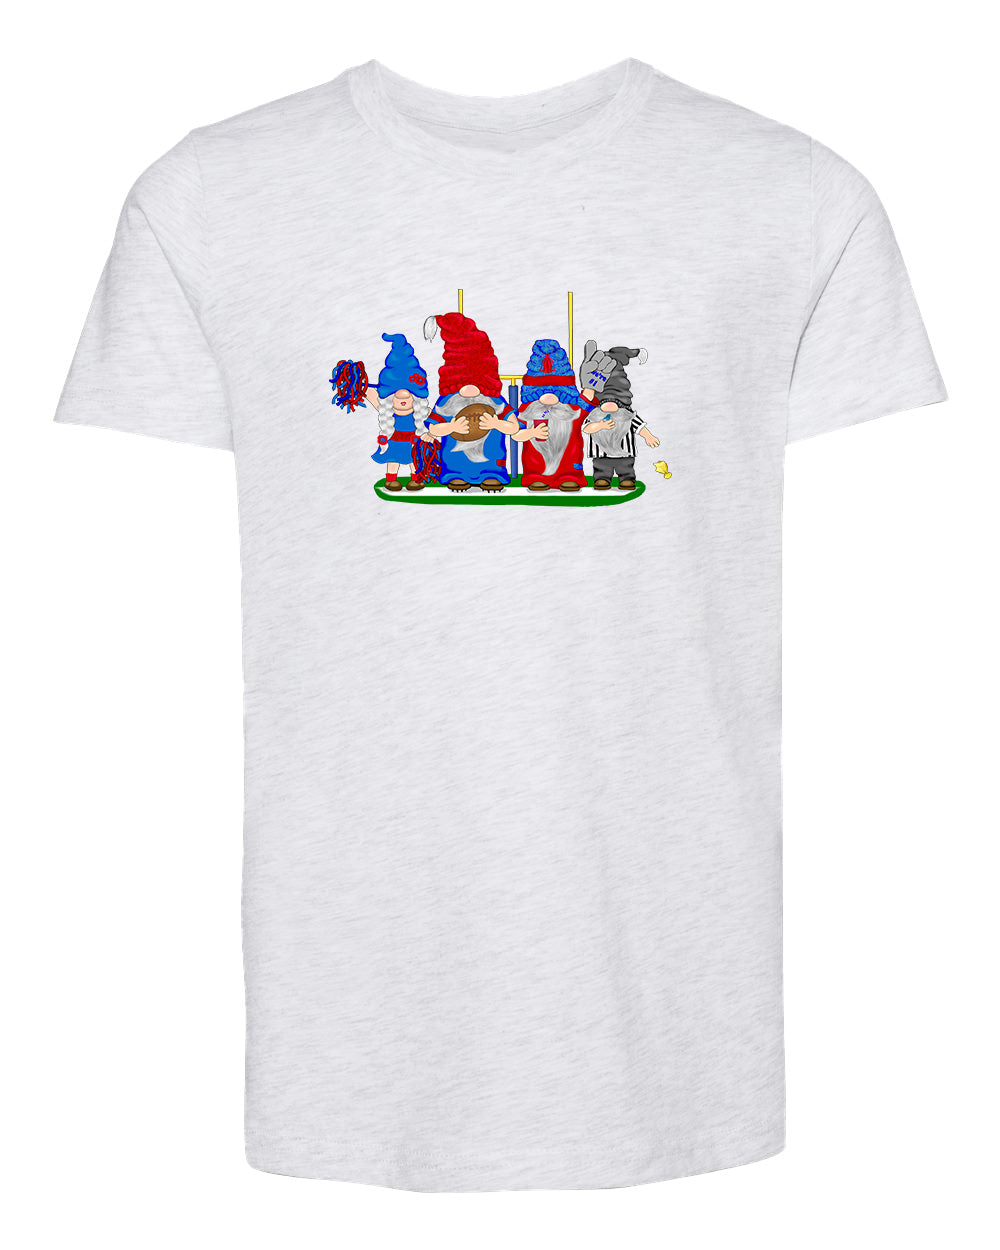 Navy & Red Football Gnomes  (similar to New England) on Kids T-shirt